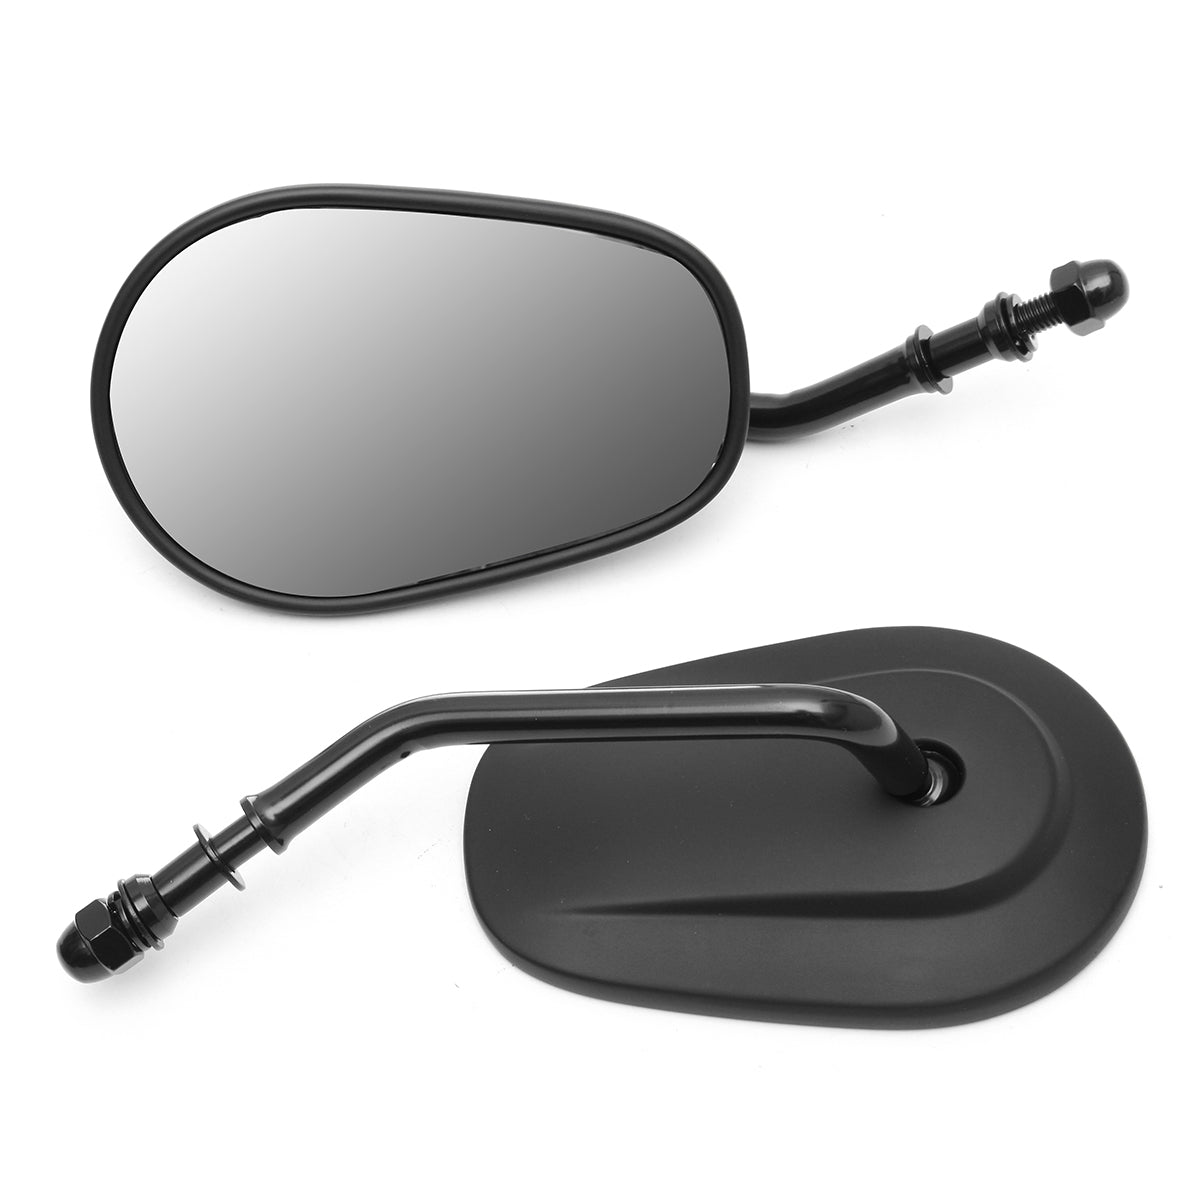 Dim Gray 8mm Rear View Side Mirror Fits For Harley Davidson Sportster Touring XL 883 (Black)